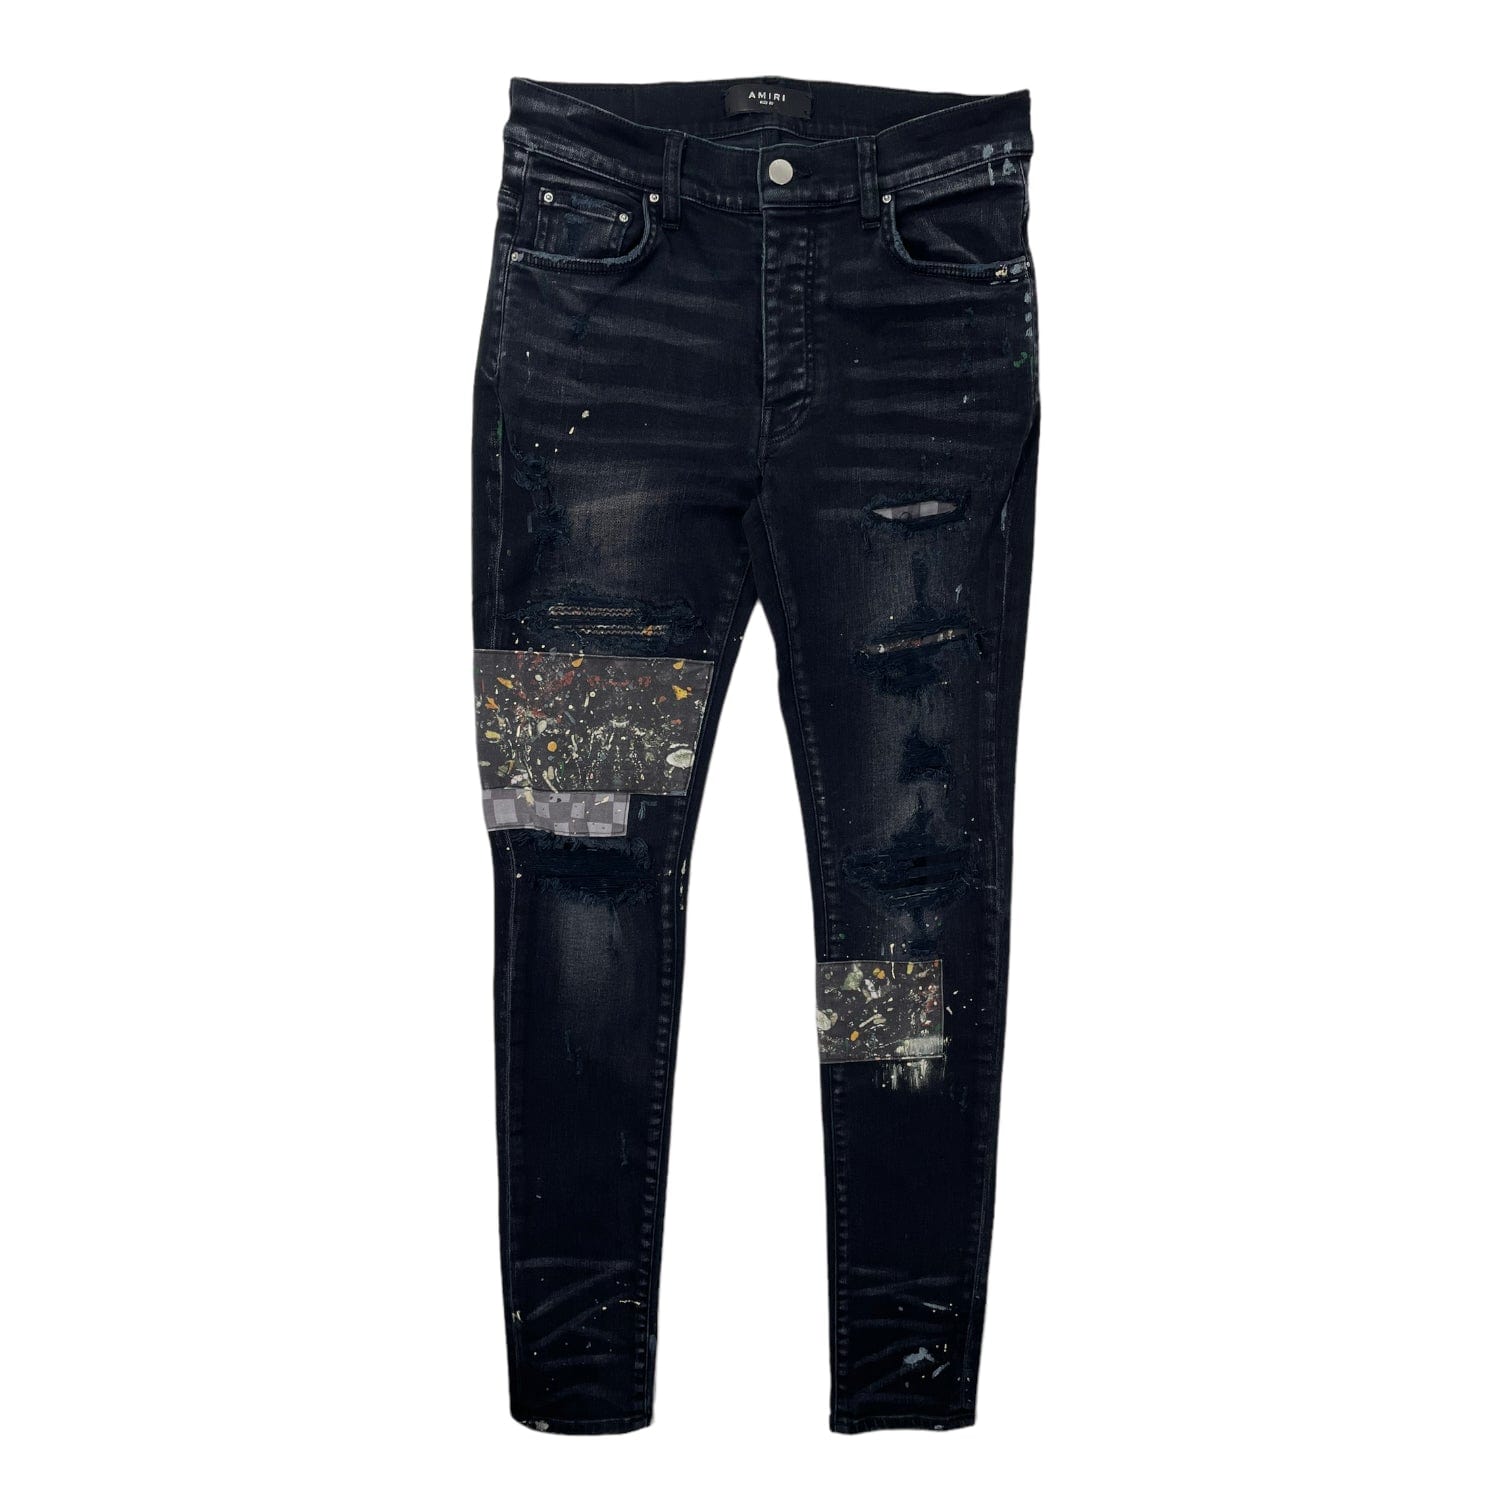 Amiri Art Patch Paint Checker Jeans Aged Black Pre-Owned – Origins NYC